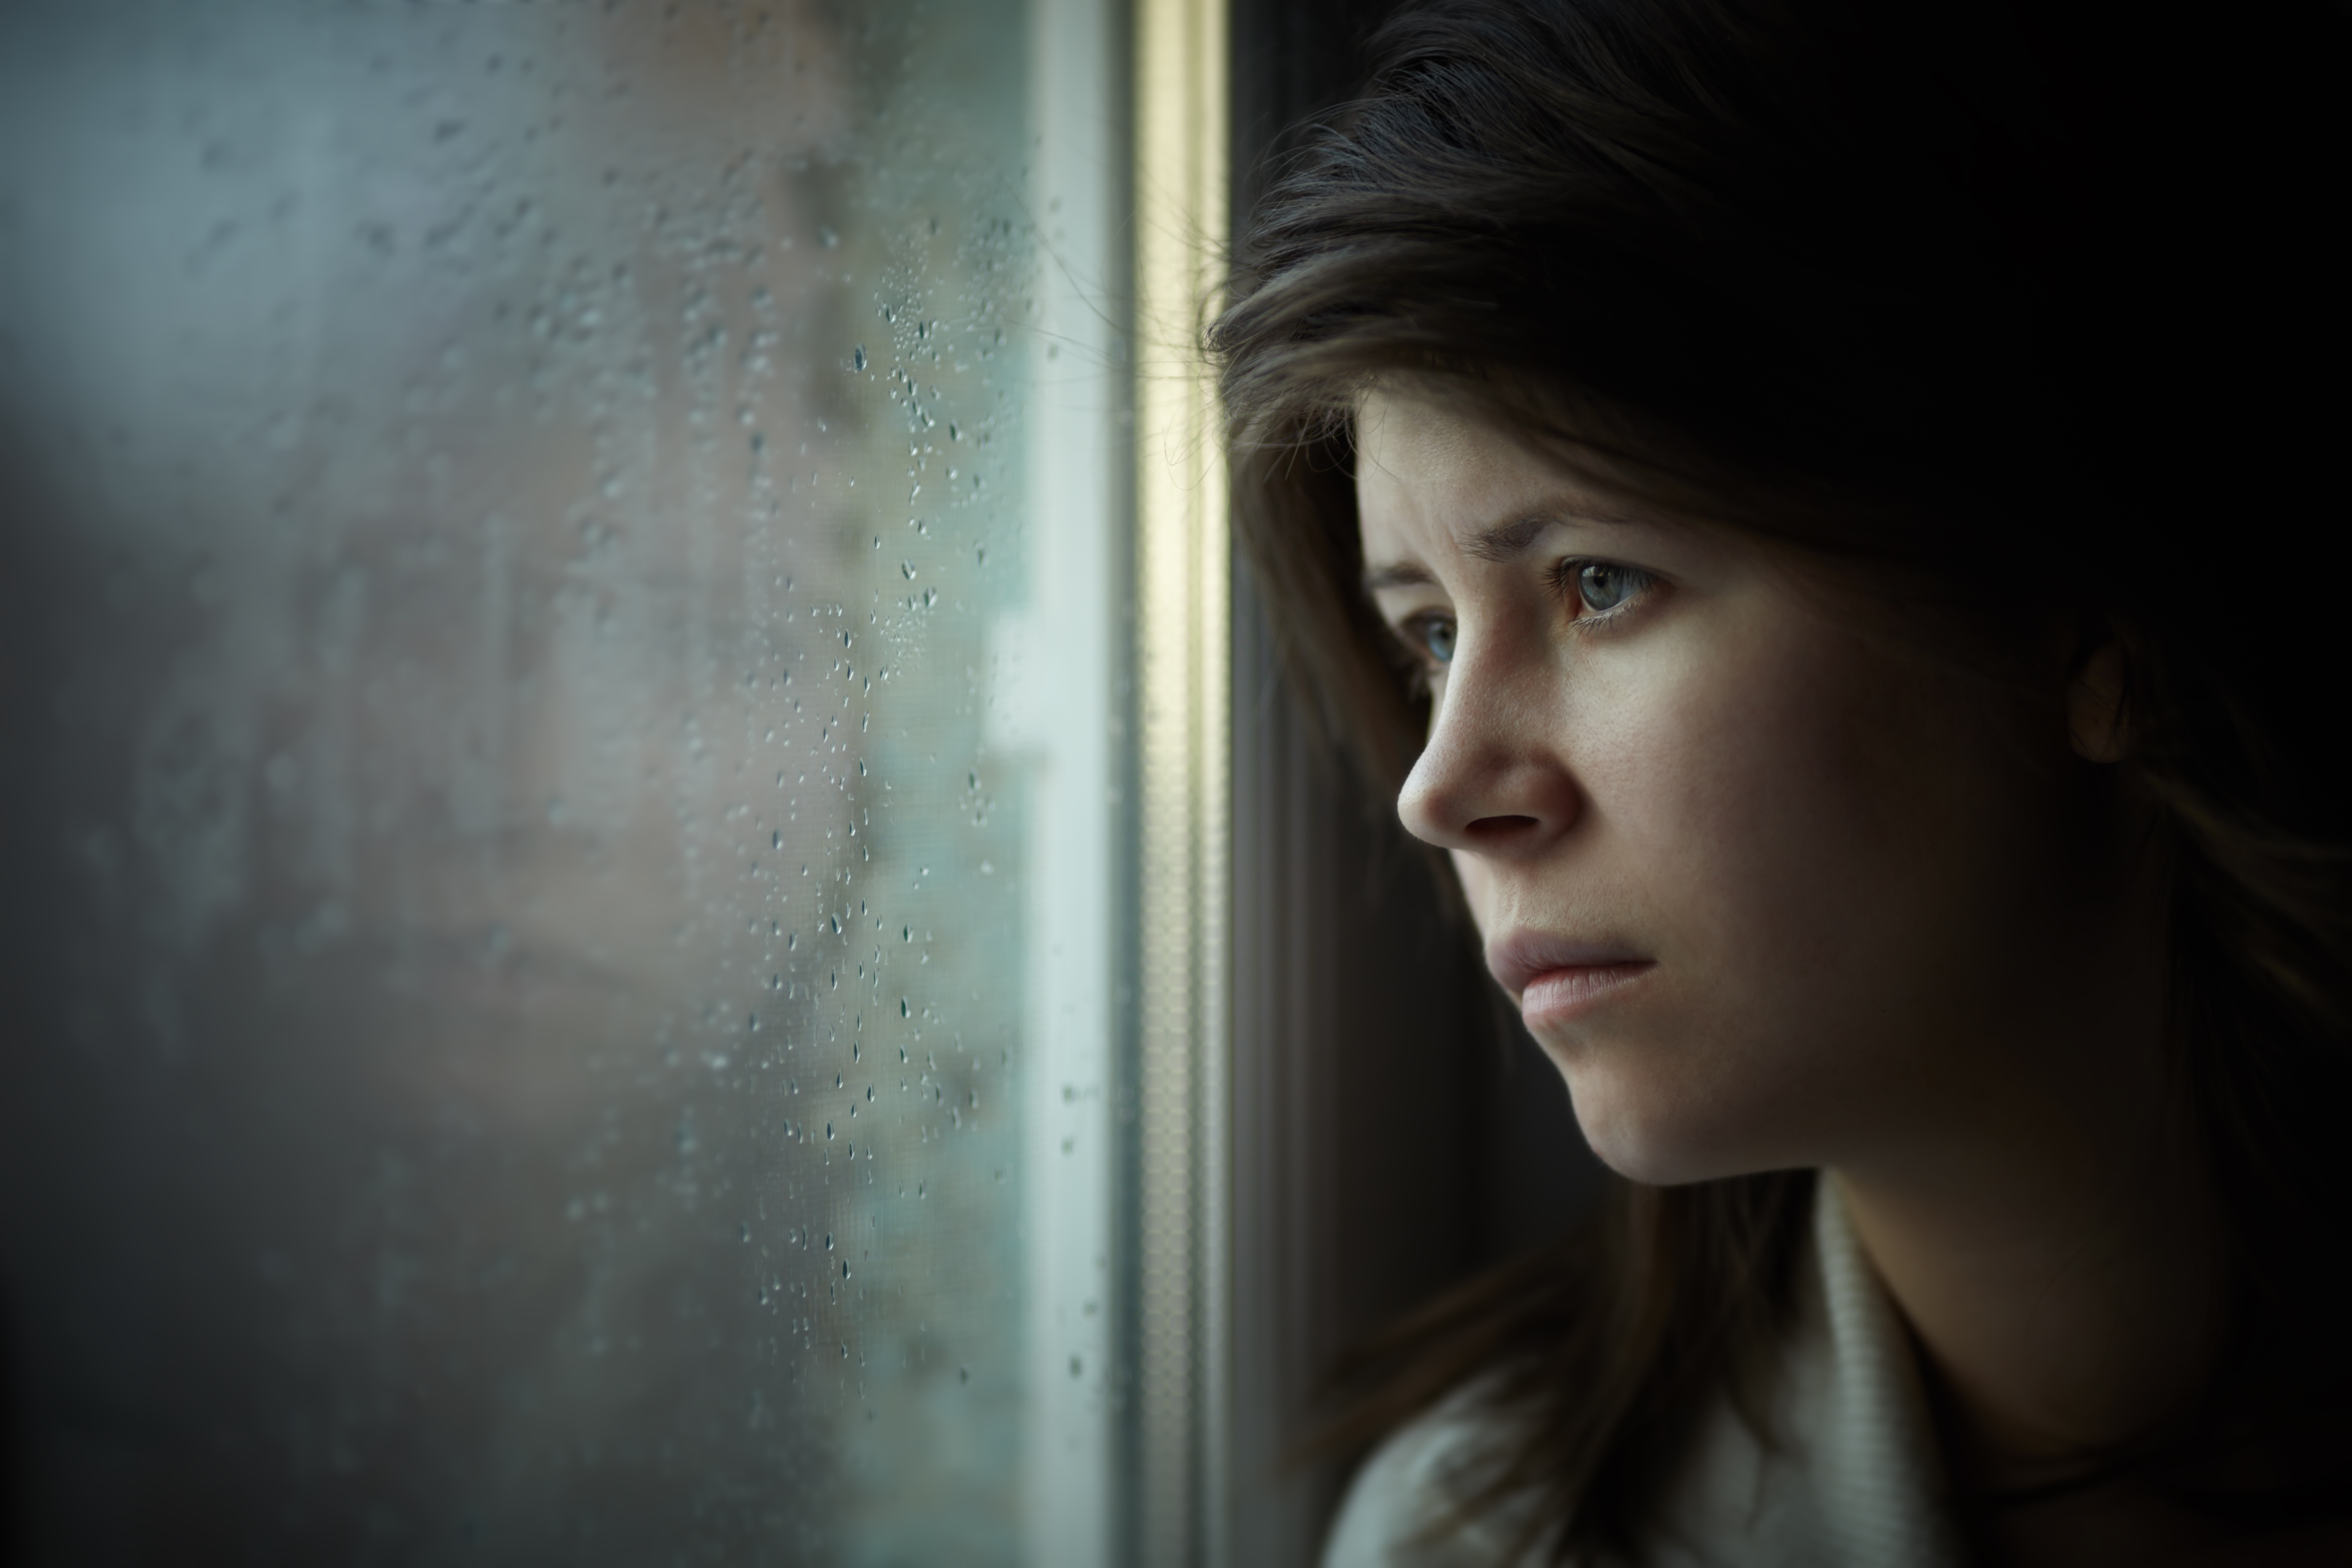 Psychological treatment may be effective in reducing self-harm